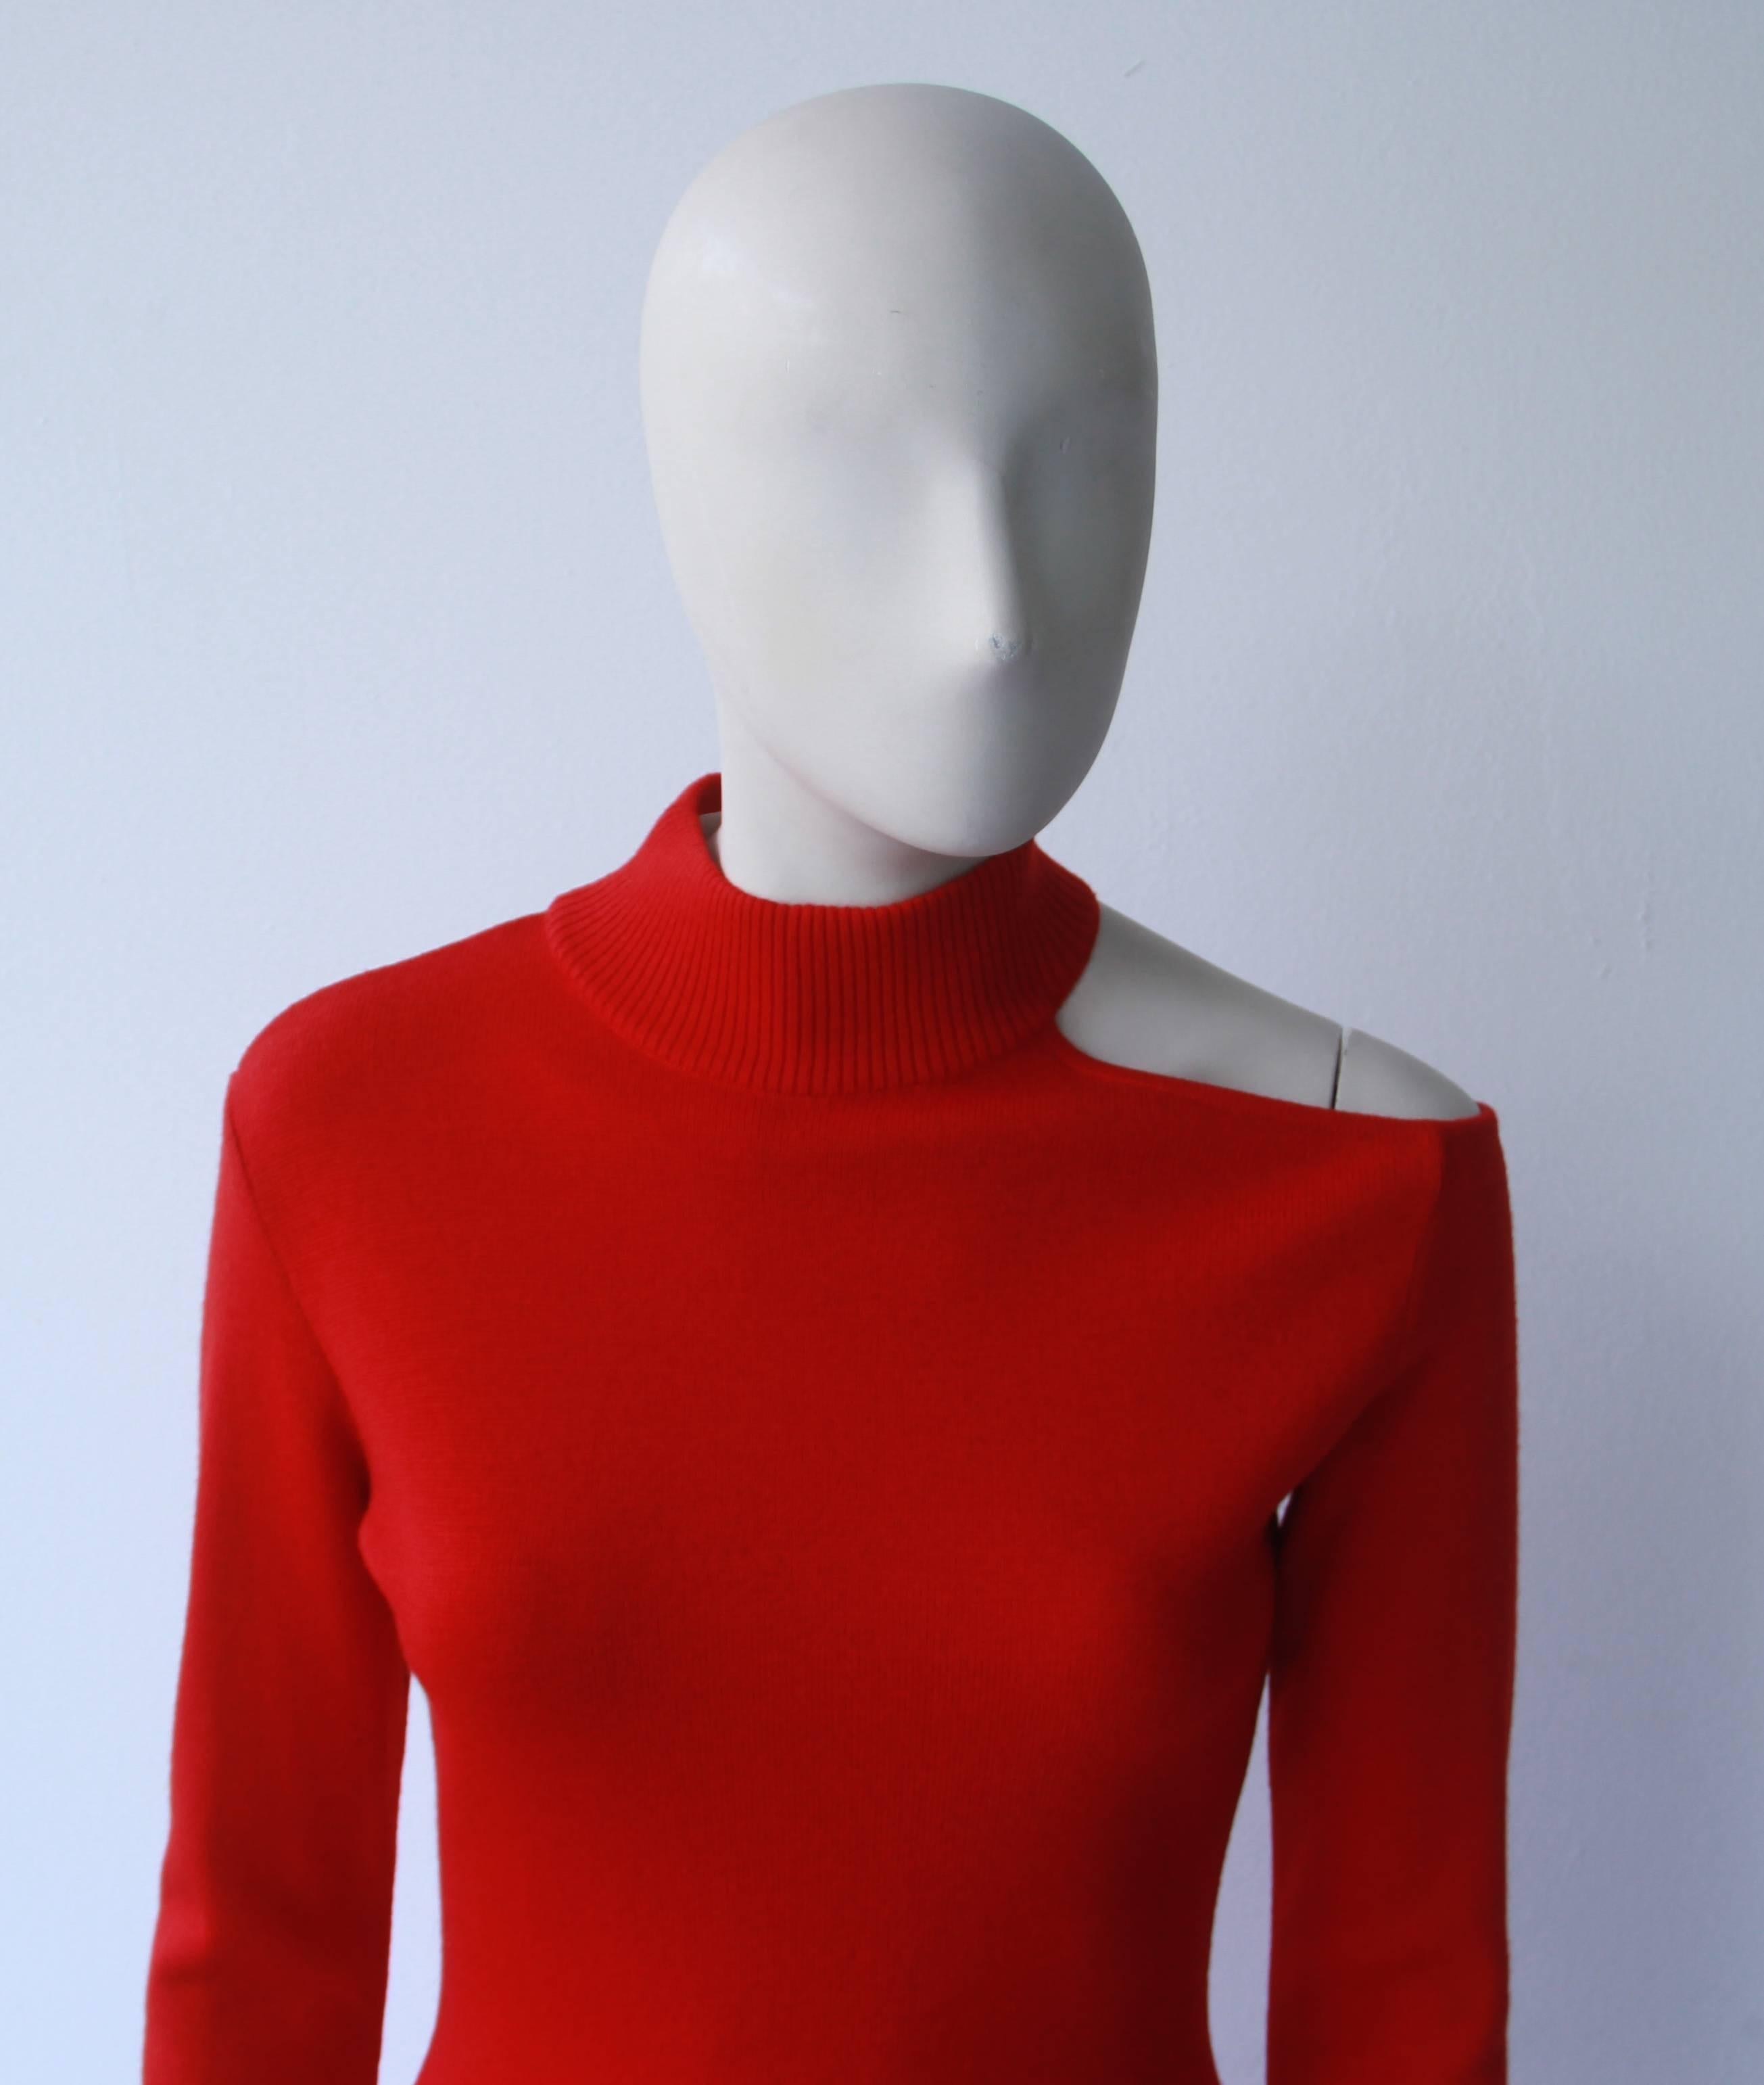 Gianni Versace knit cut-out dress from the Fall 1997 collection.

Marked an Italian size 40.

Manufacturer - Alias S.p.a.

Fabric content - 100% wool